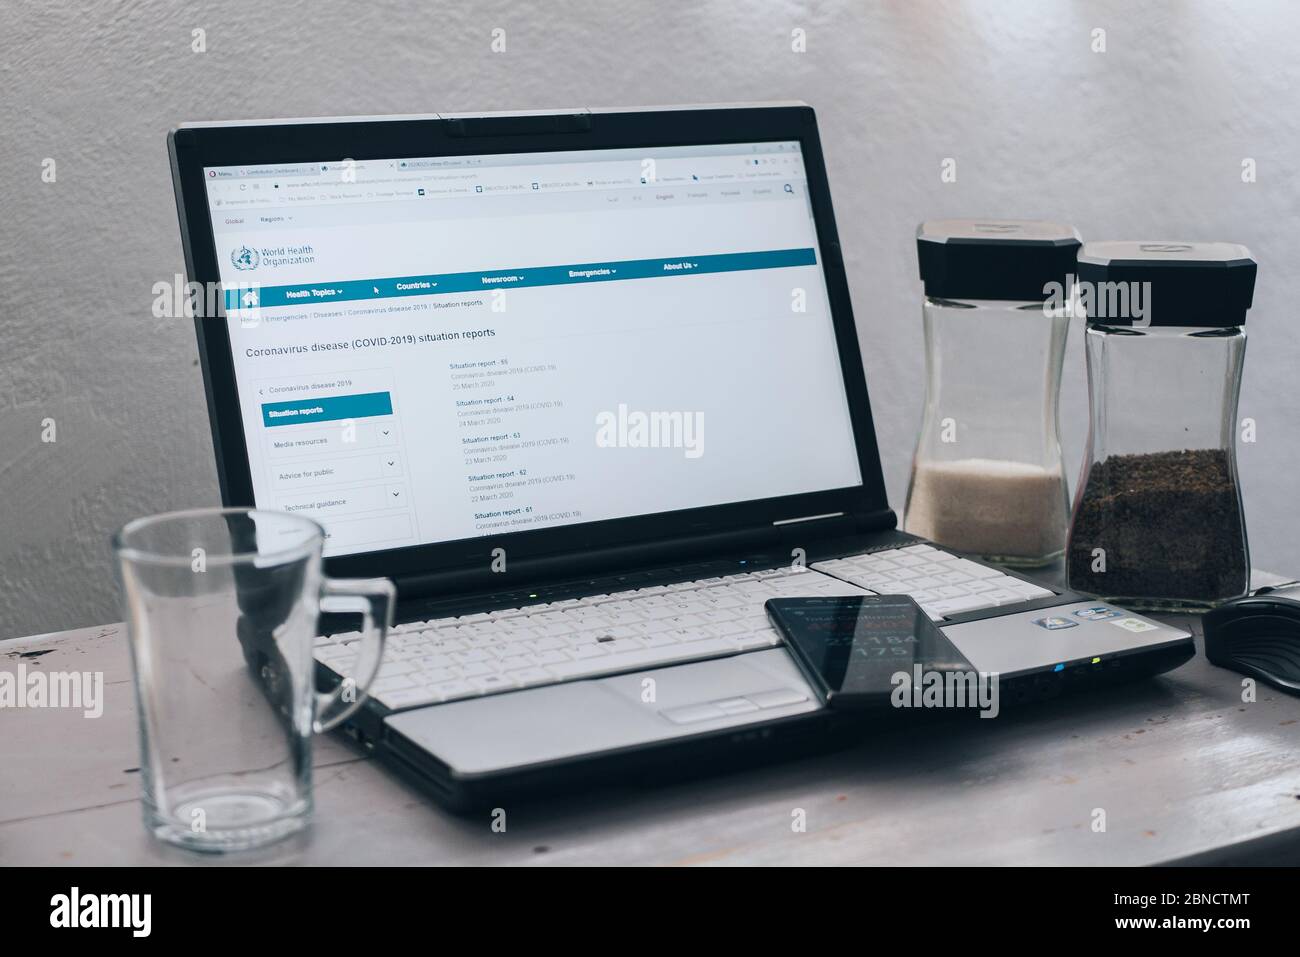 Laptop with website of World Health Organization at page of Coronavirus Disease (Covid-19) situation report, notebook on wooden table with jar of coffee and cup, Mexico, May 14, 2020 Stock Photo